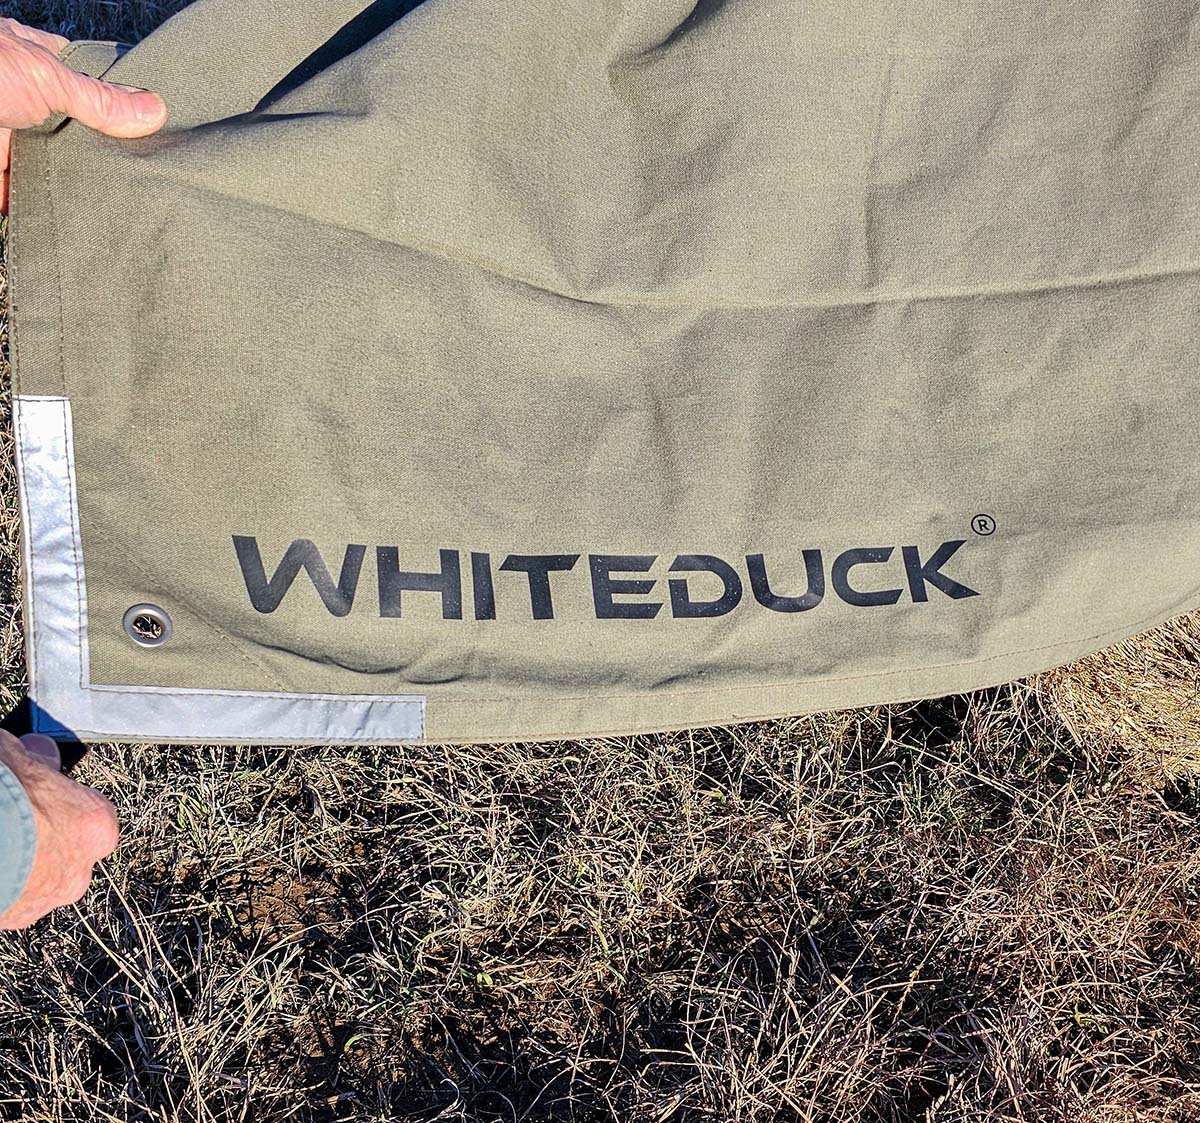 A person holding the corner of the White Duck tarp review out to show it's reinforced grommet and corner.